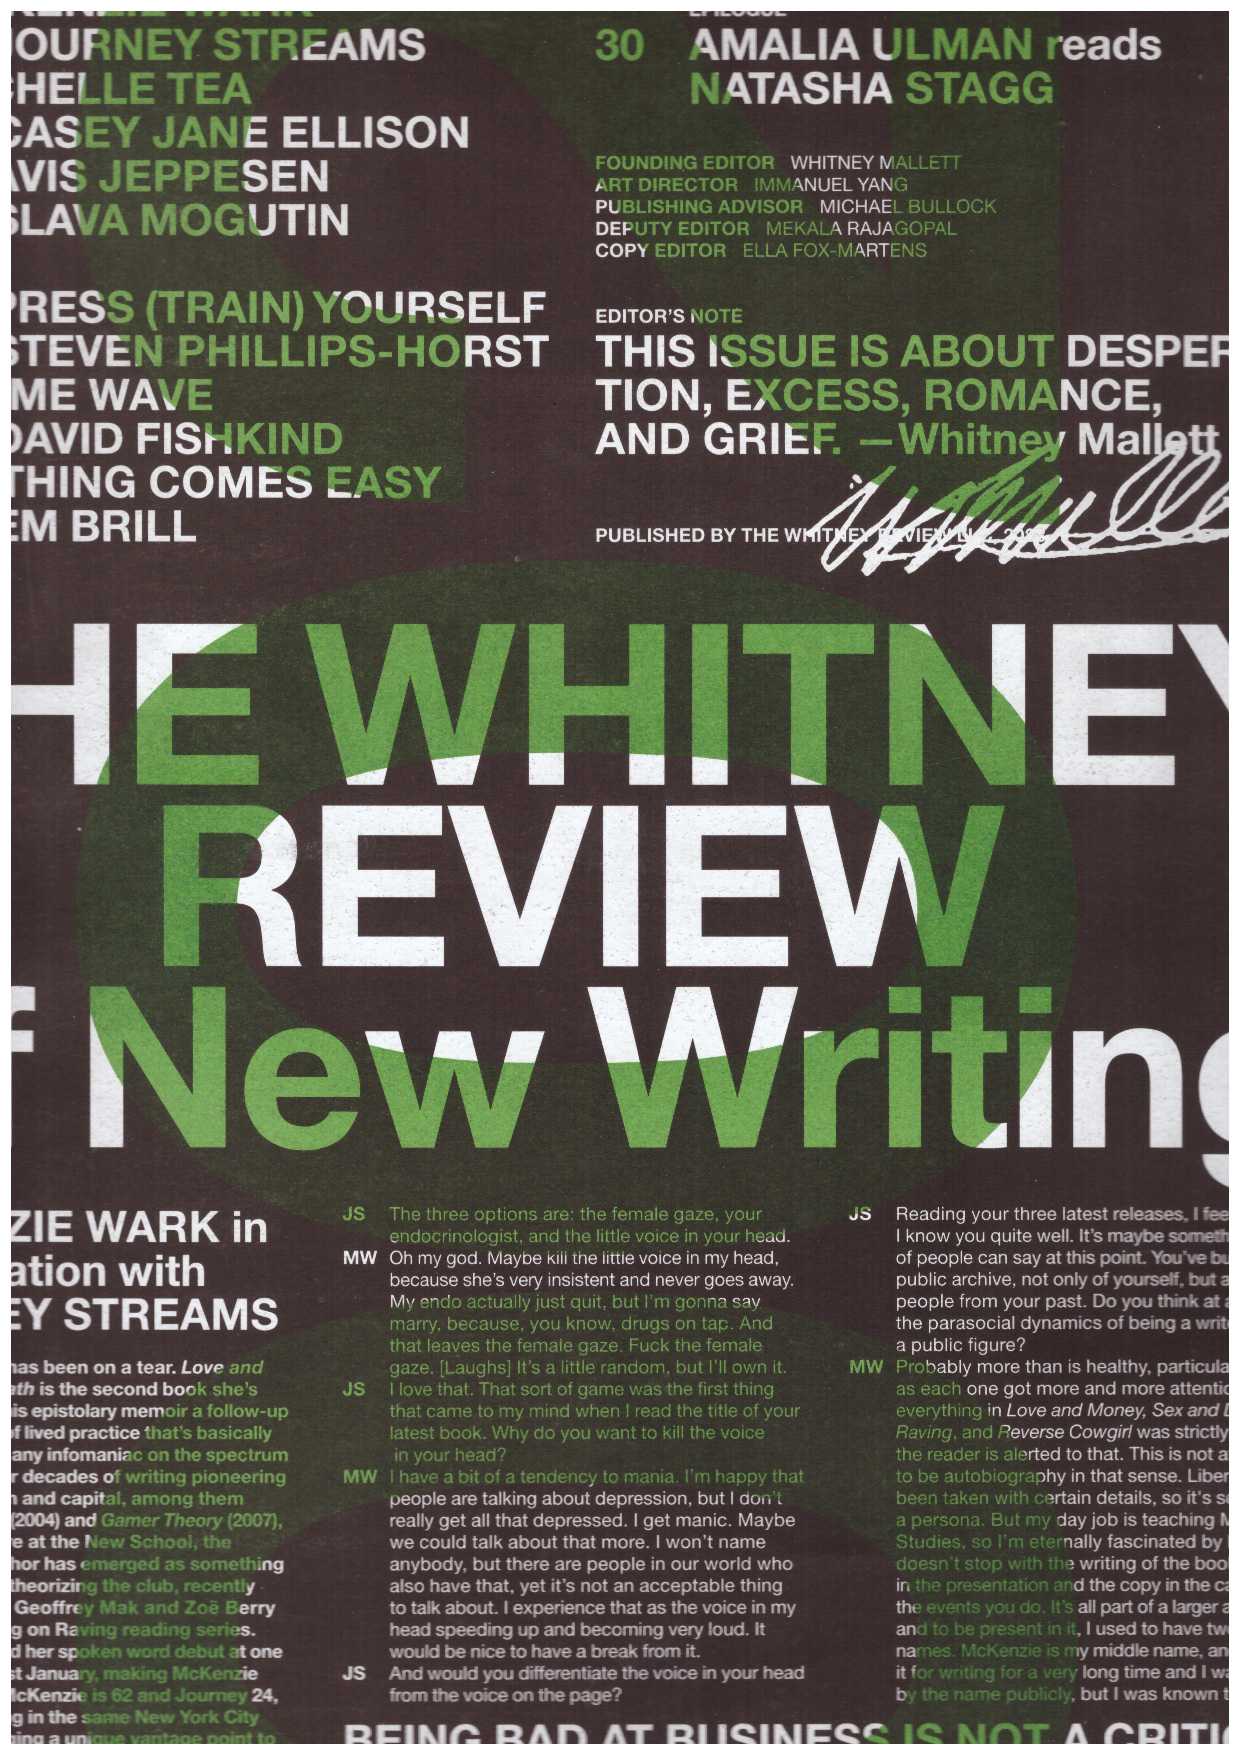 MALLETT, Whitney (ed.) - The Whitney Review of New Writing #2 Fall